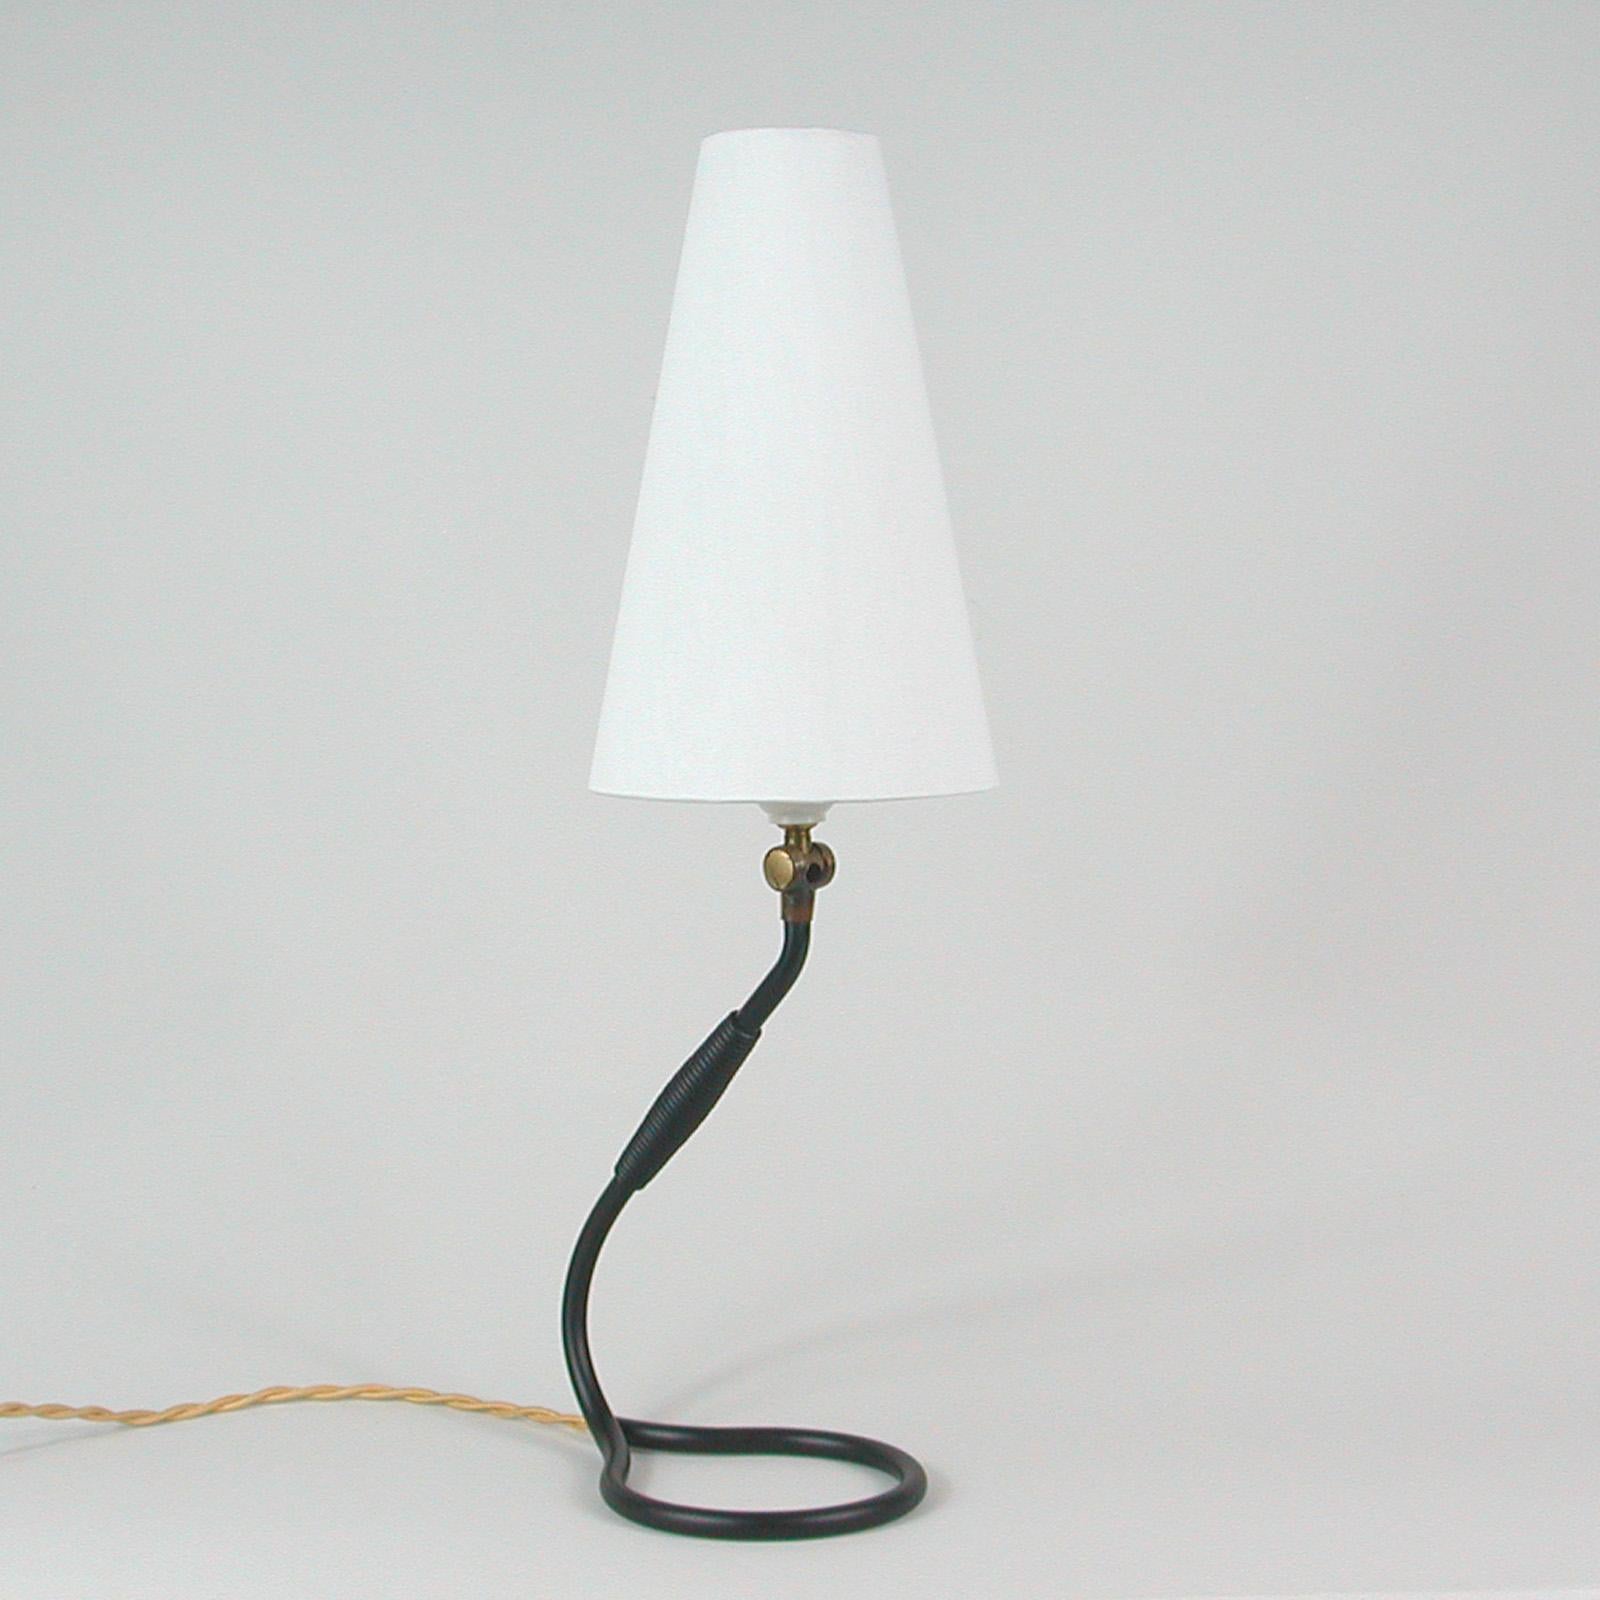 Adjustable Black Brass and Bakelite Wall or Table Lamp 306 by Kaare Klint, 1950s For Sale 5